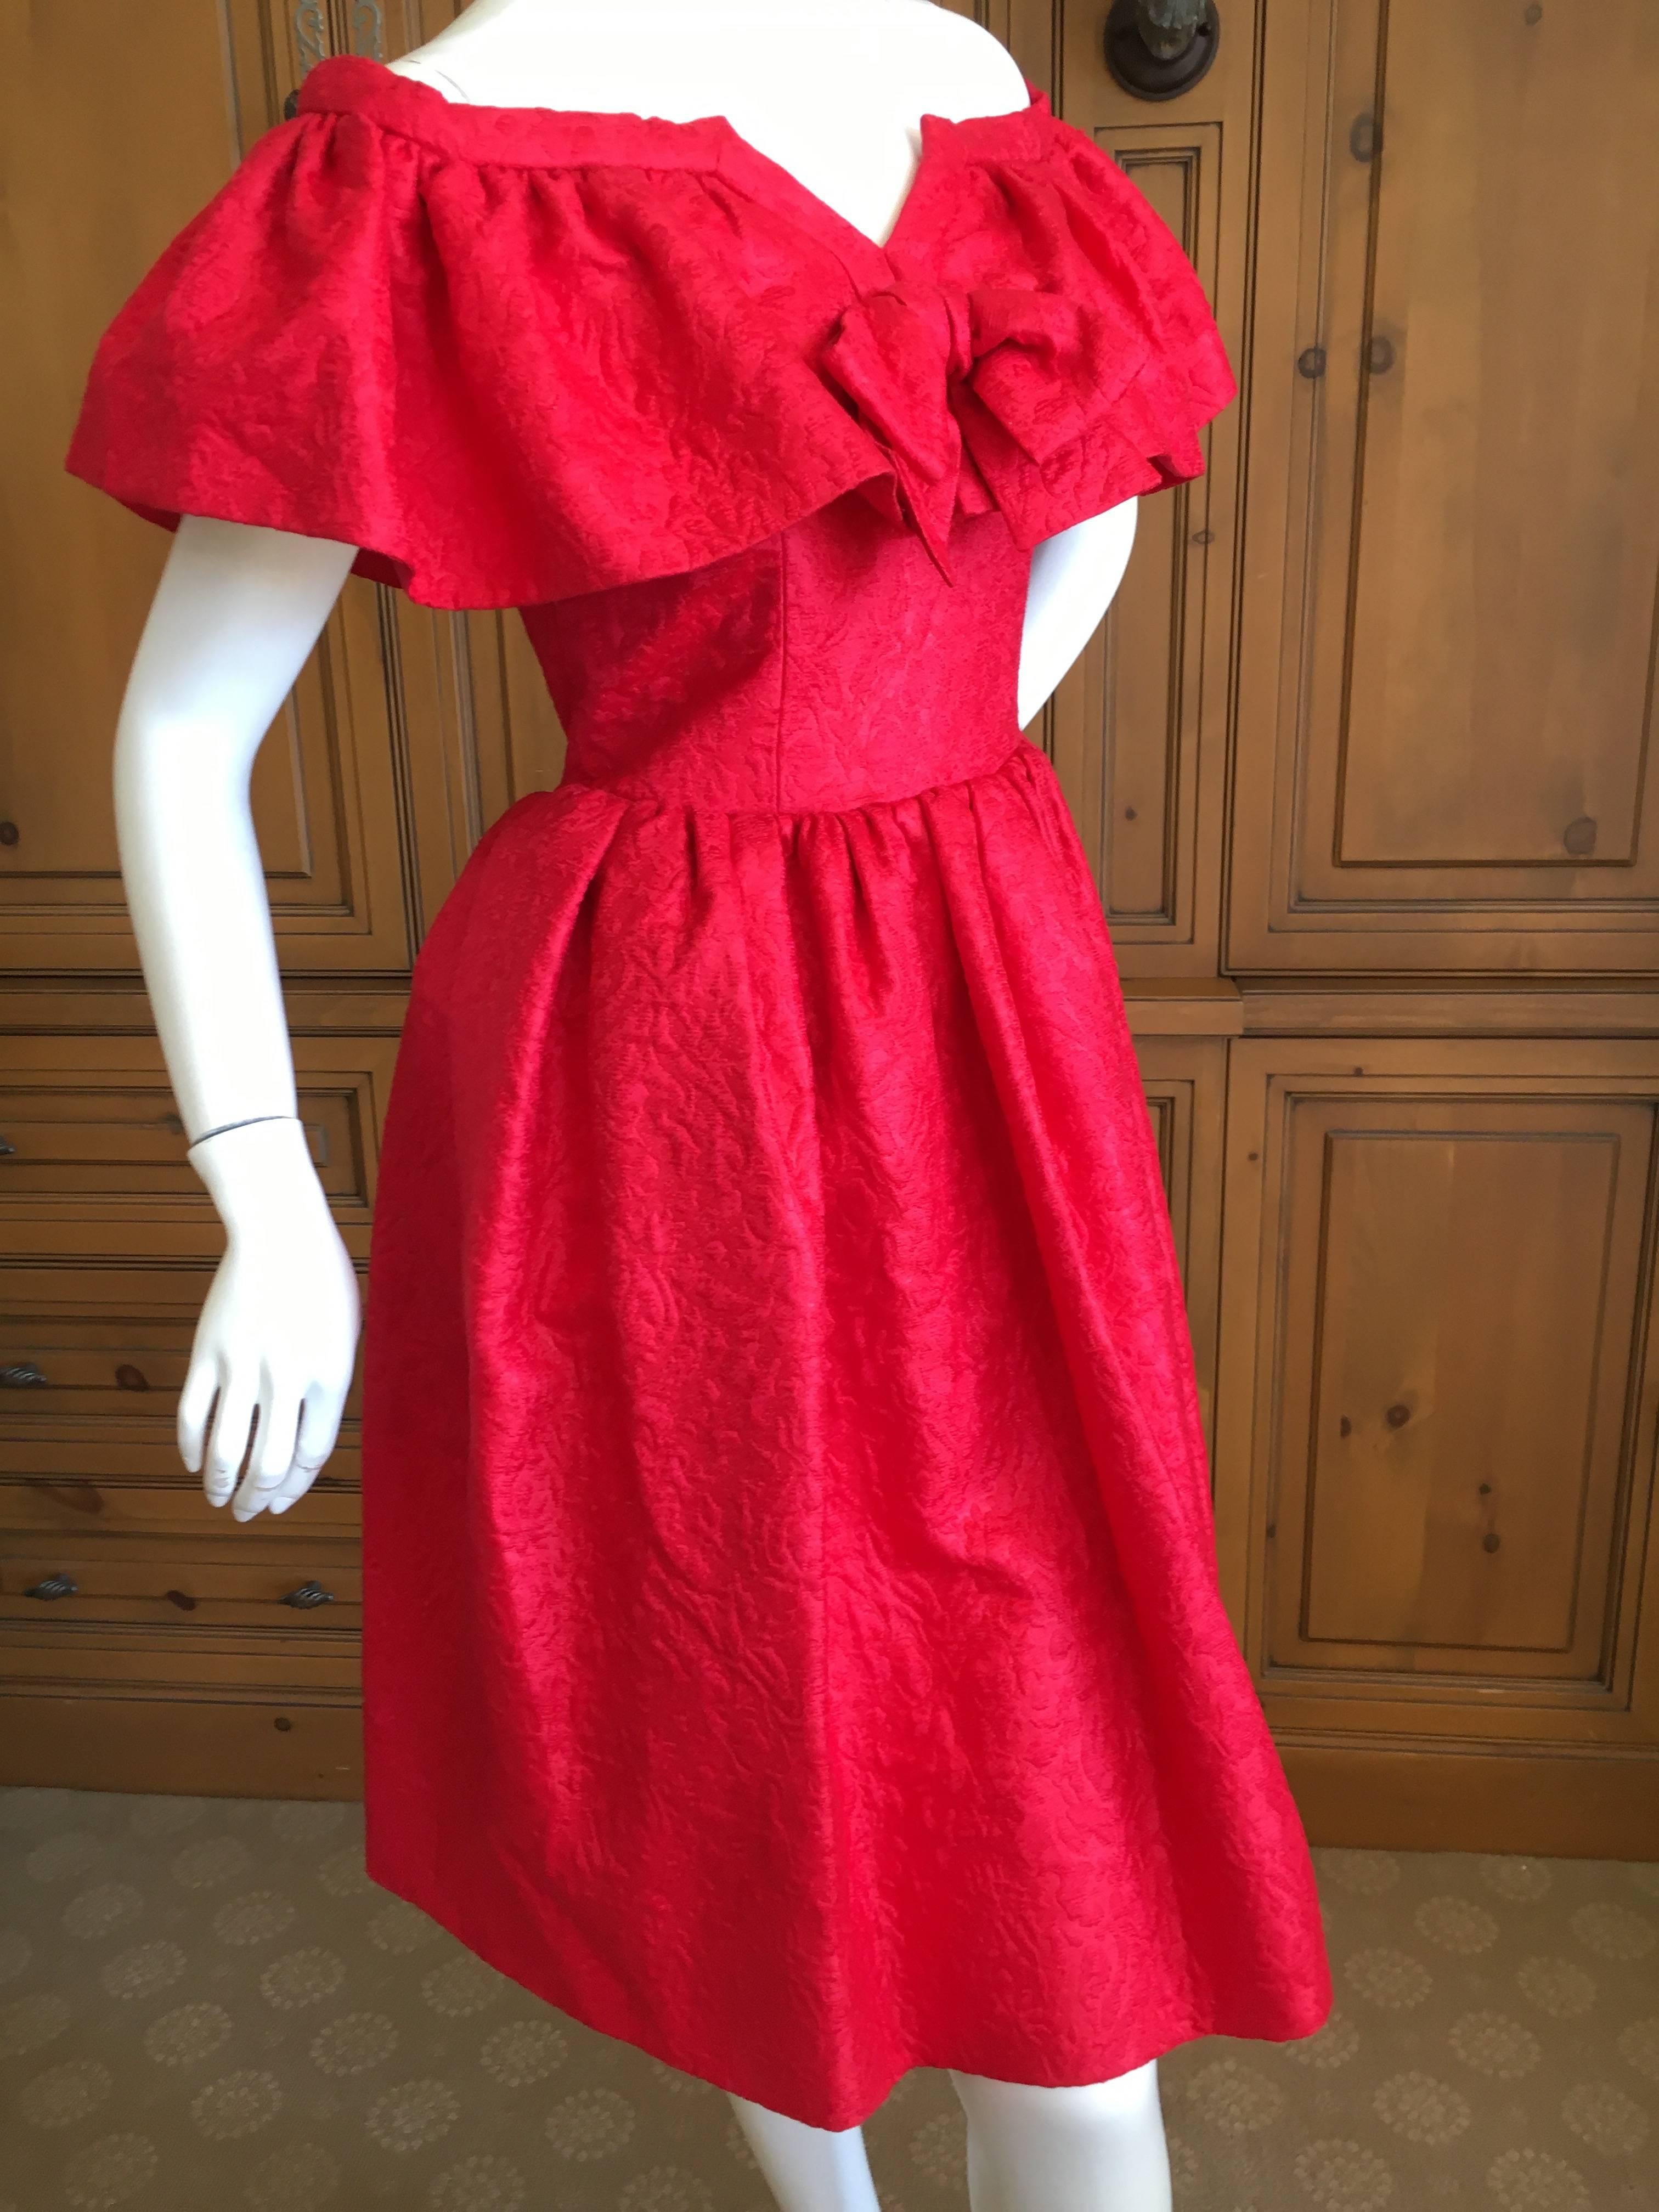 Yves Saint Laurent 1970's Rive Gauche Off The Shoulder Jacquard Capelet Dress In Excellent Condition For Sale In Cloverdale, CA